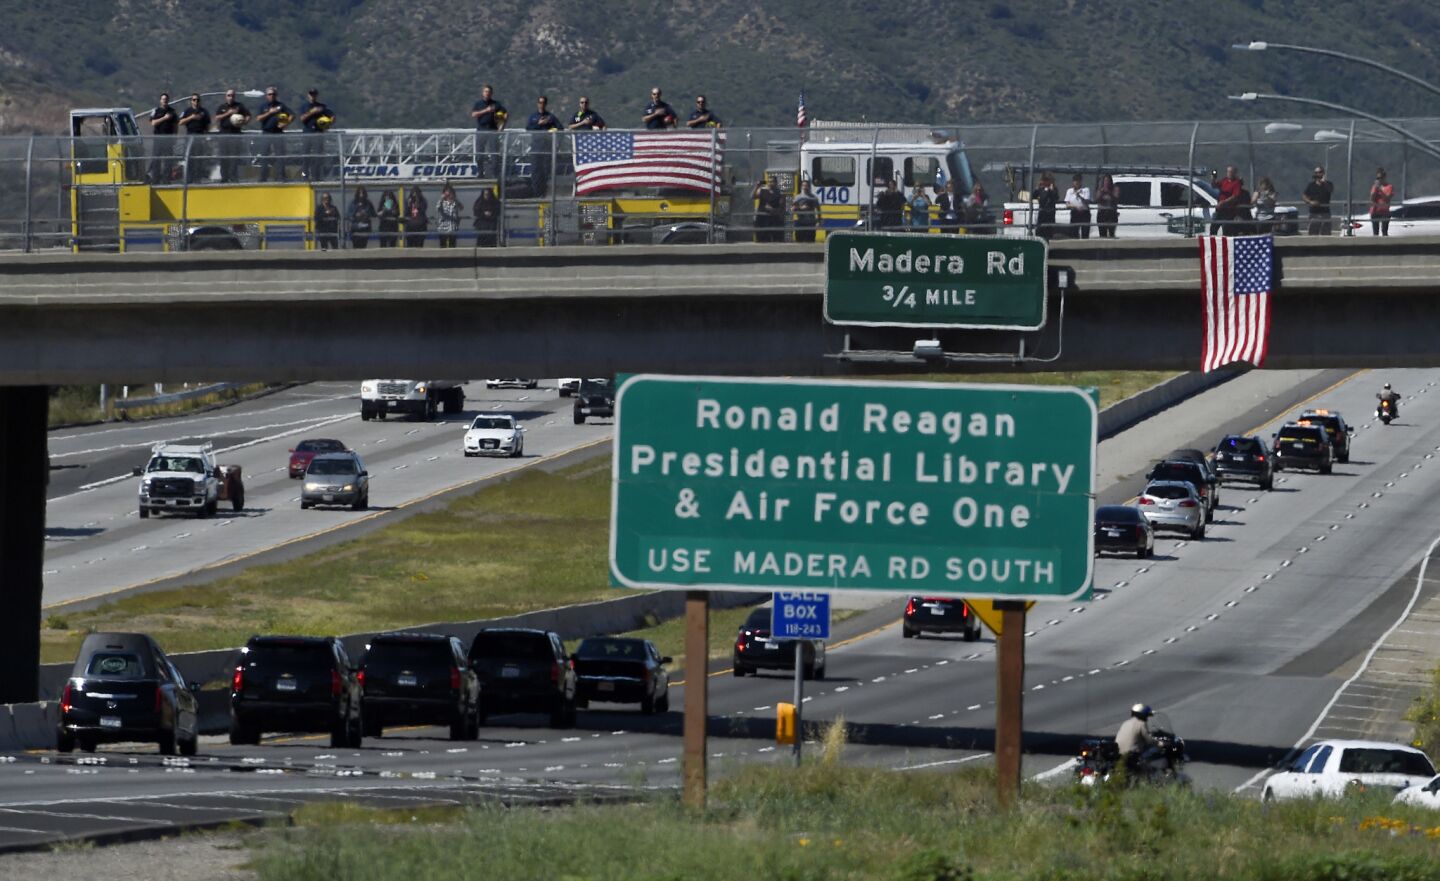 Firefighters salute as the hearse carrying the body of Nancy Reagan makes its way to the Ronald Reagan Presidential Library.